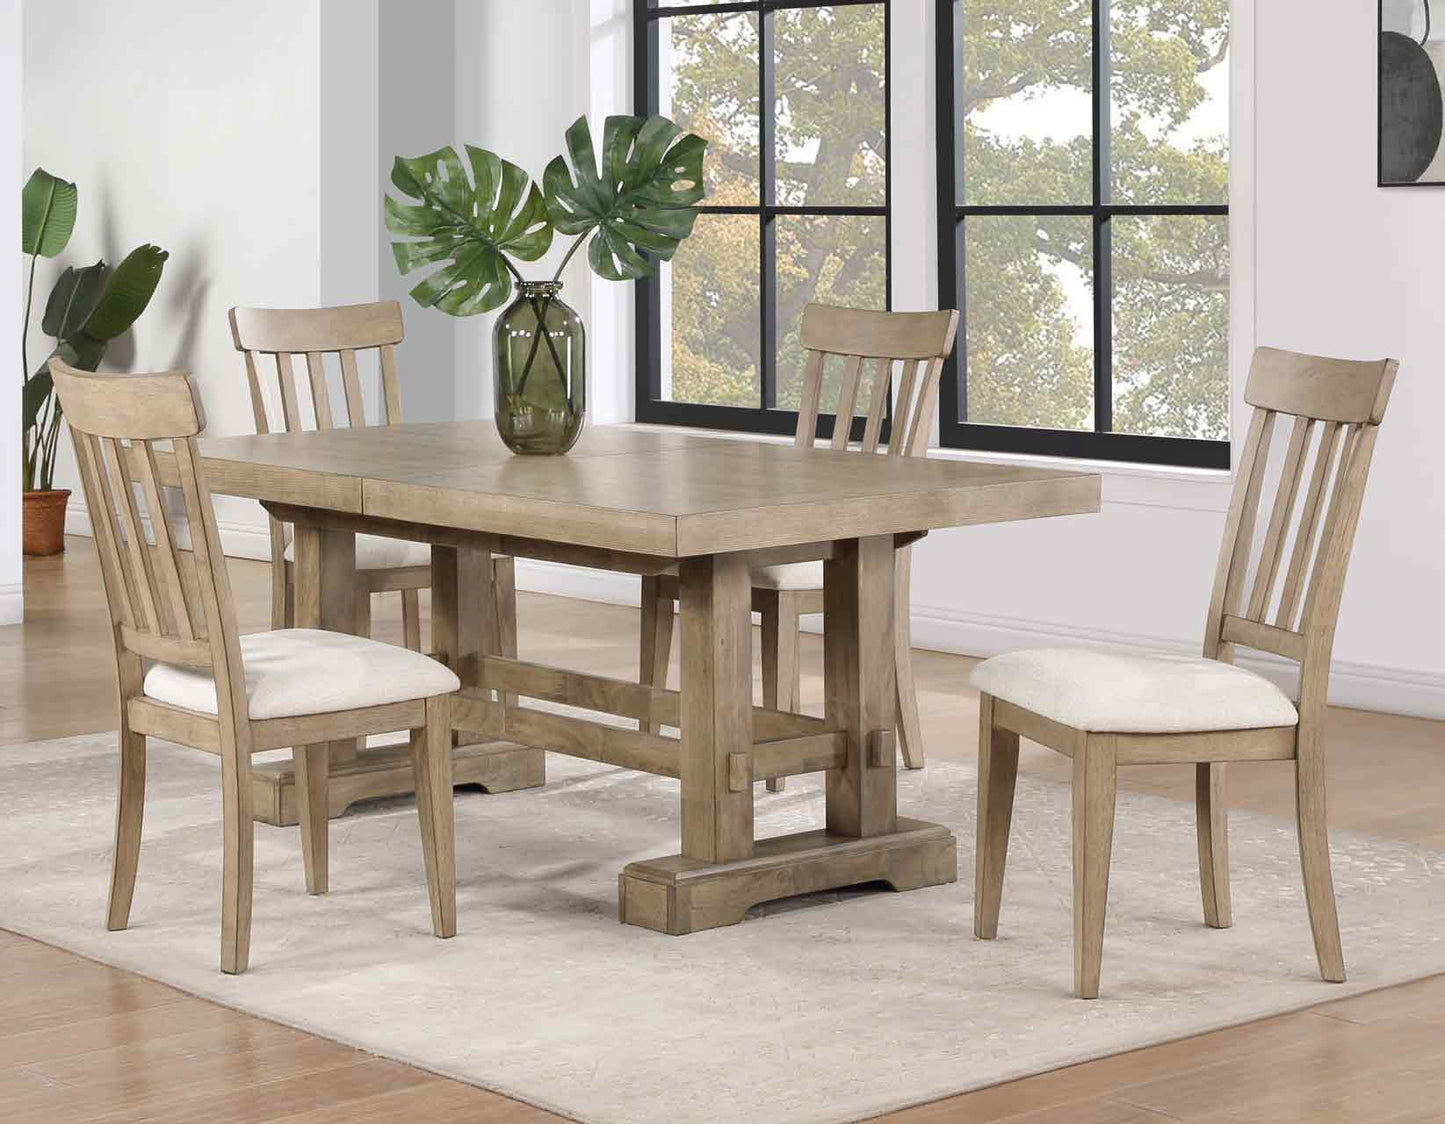 Napa 5-Piece 72-108-inch Dining Set, Sand
(Table & 4 Side Chairs)